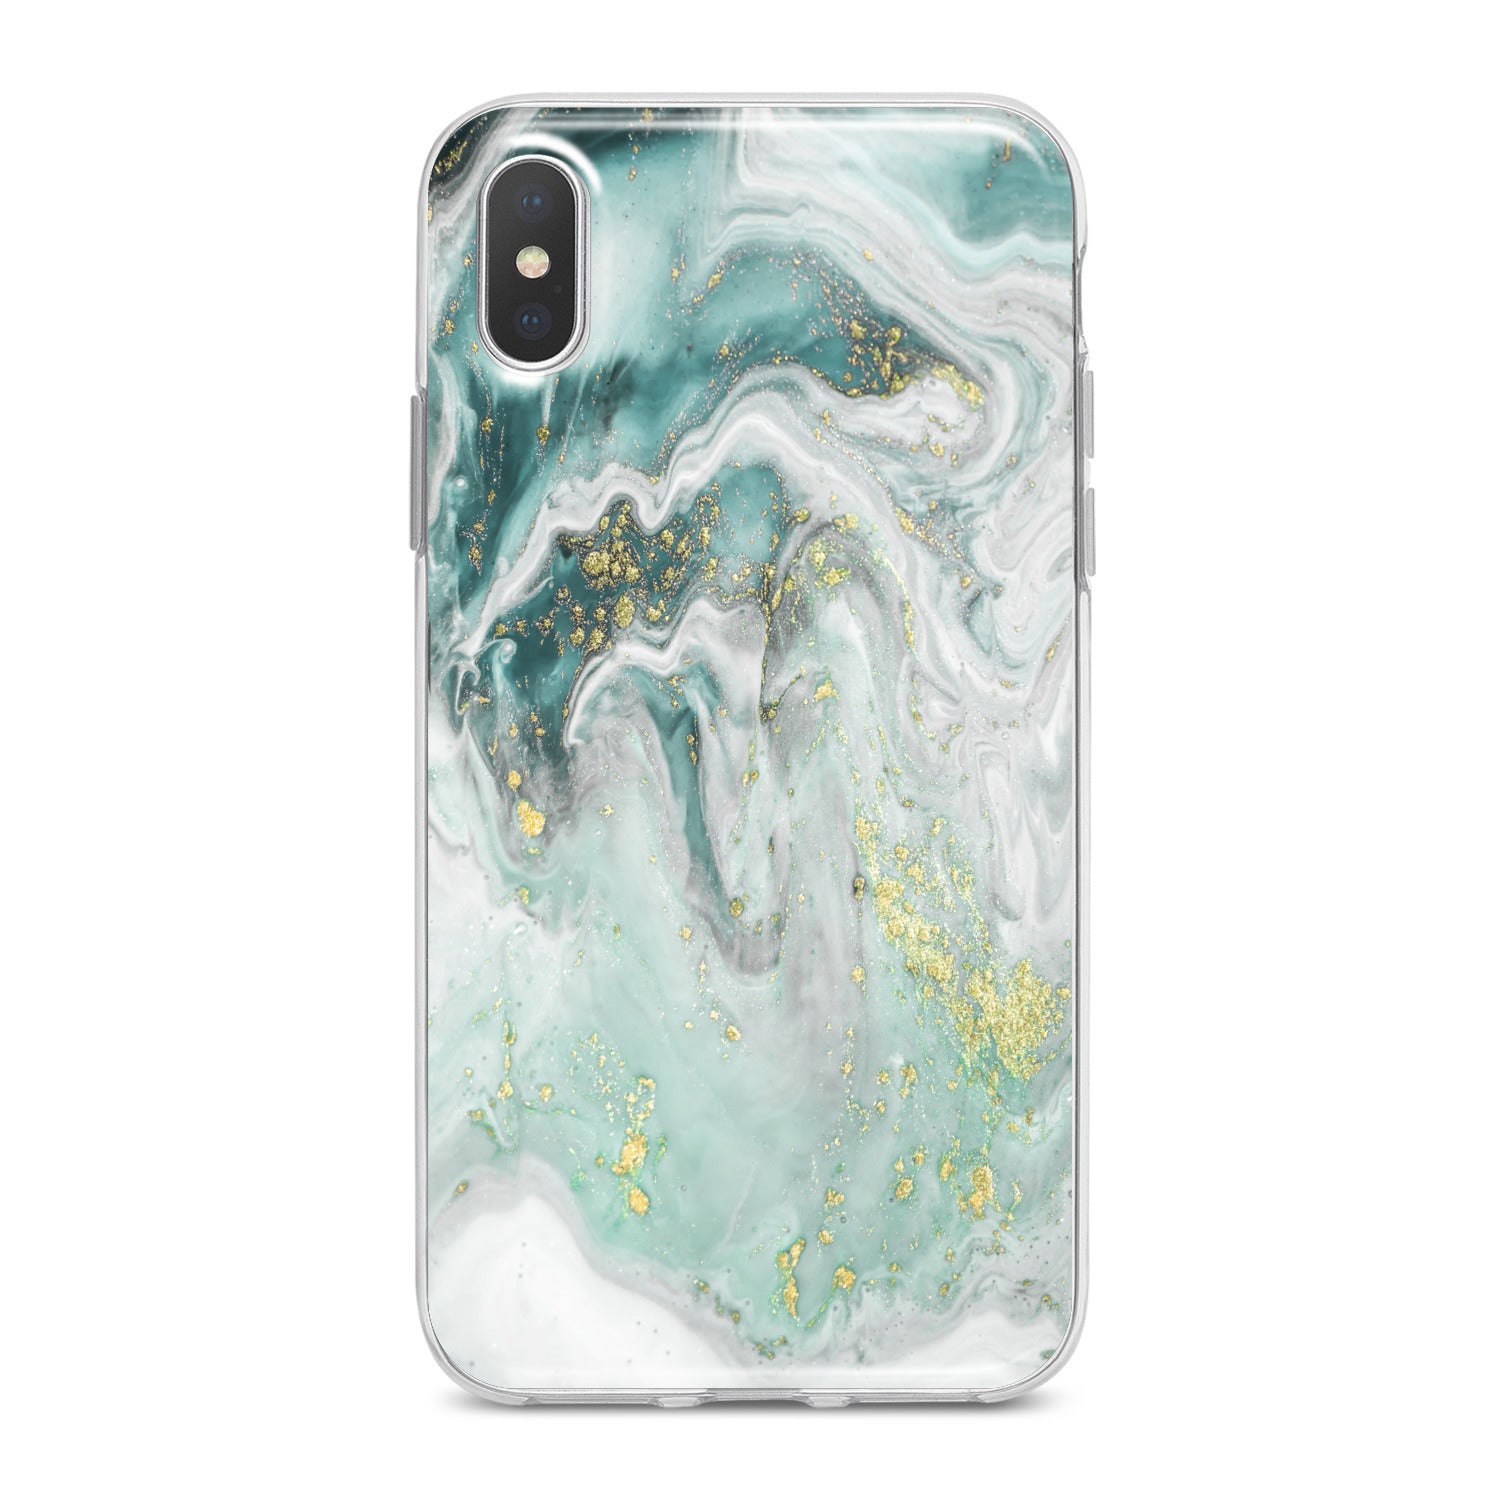 Lex Altern Oil Paint Phone Case for your iPhone & Android phone.